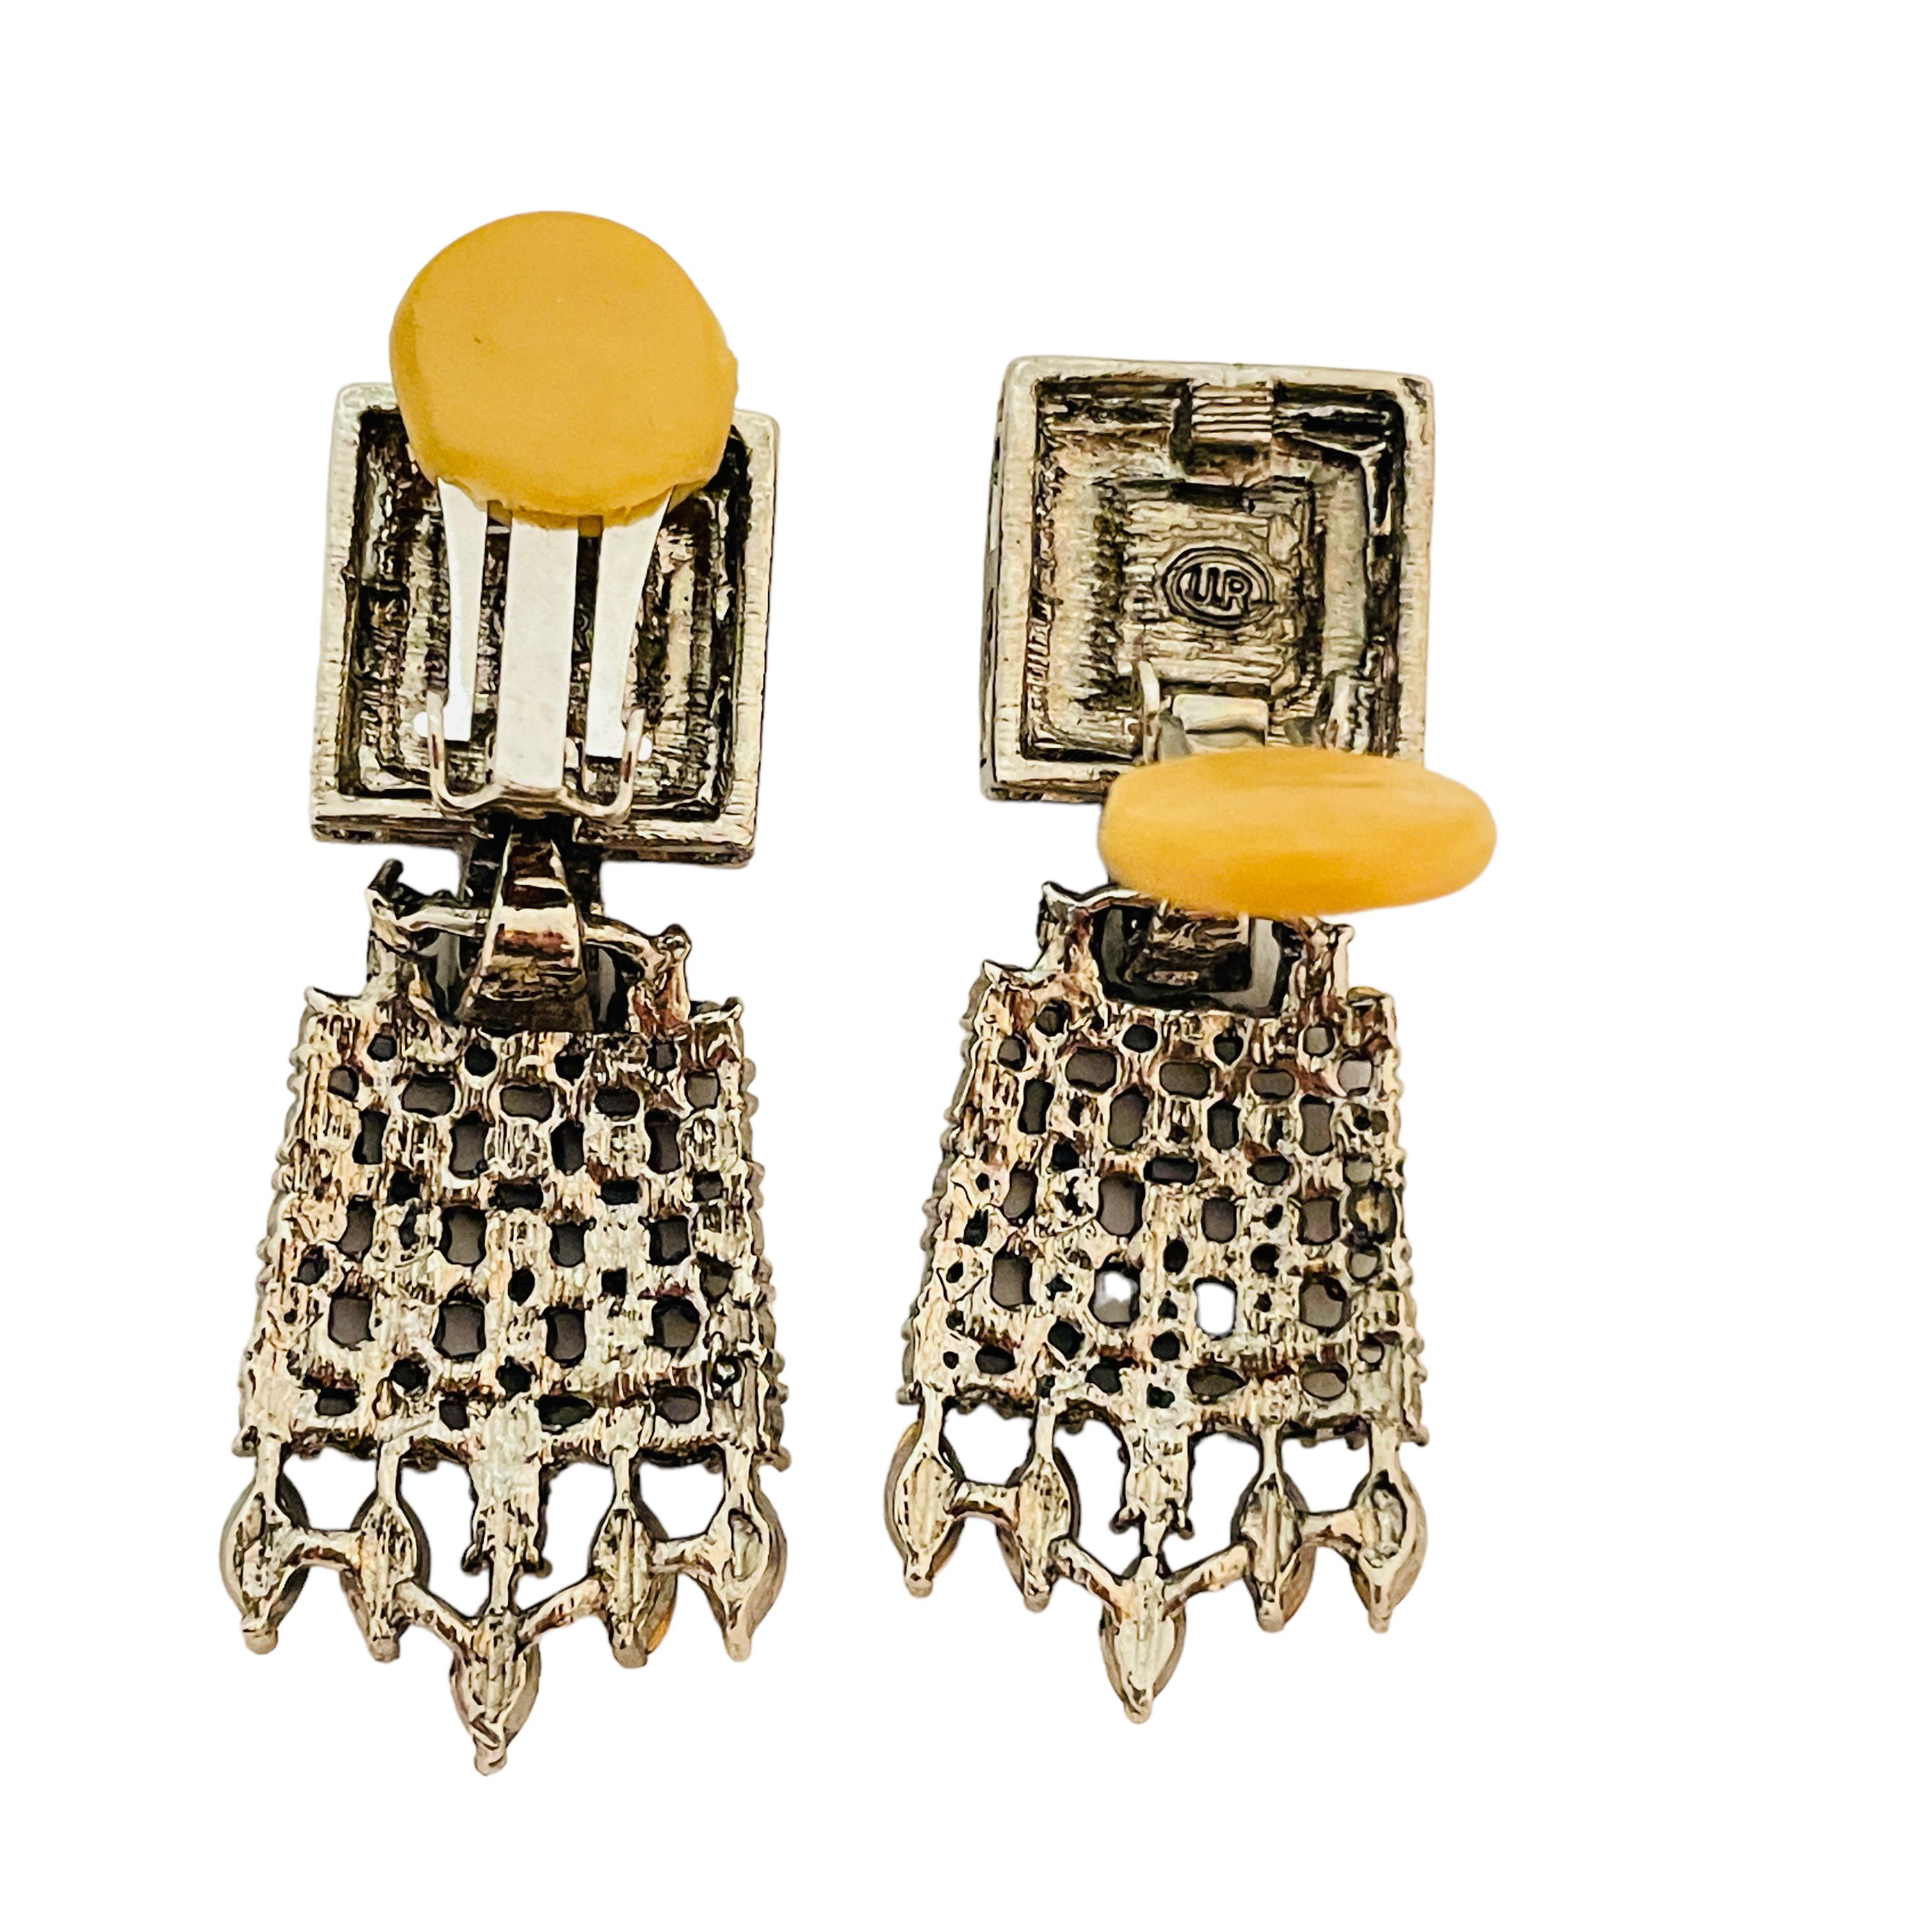 Vintage silver black rhinestone designer runway clip on earrings In Good Condition For Sale In Palos Hills, IL